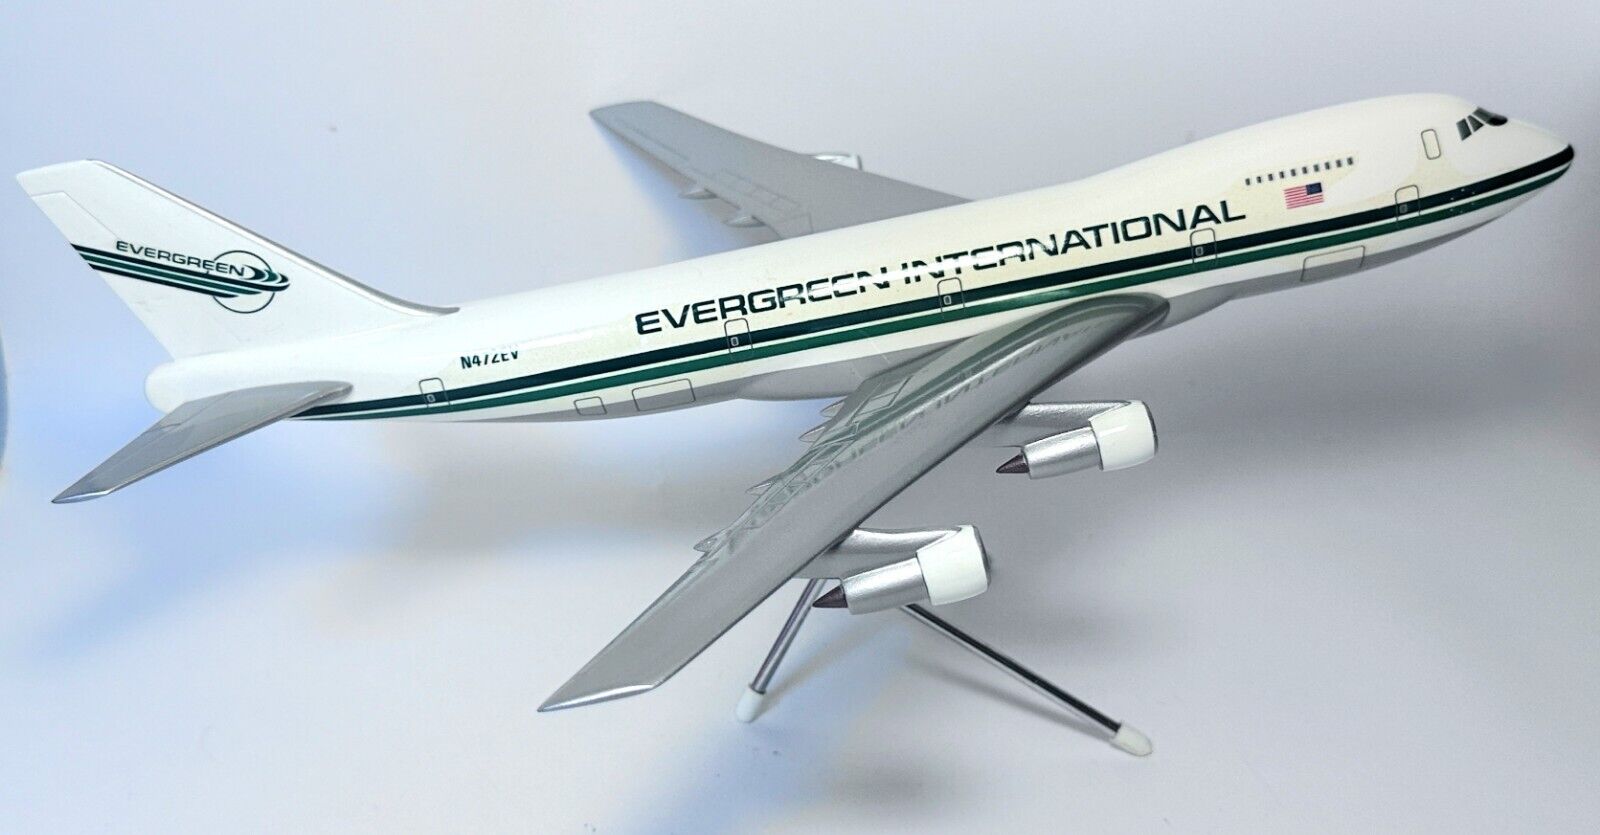 Boeing 747-200 Evergreen International Space Models Collectors Model Scale 1:200